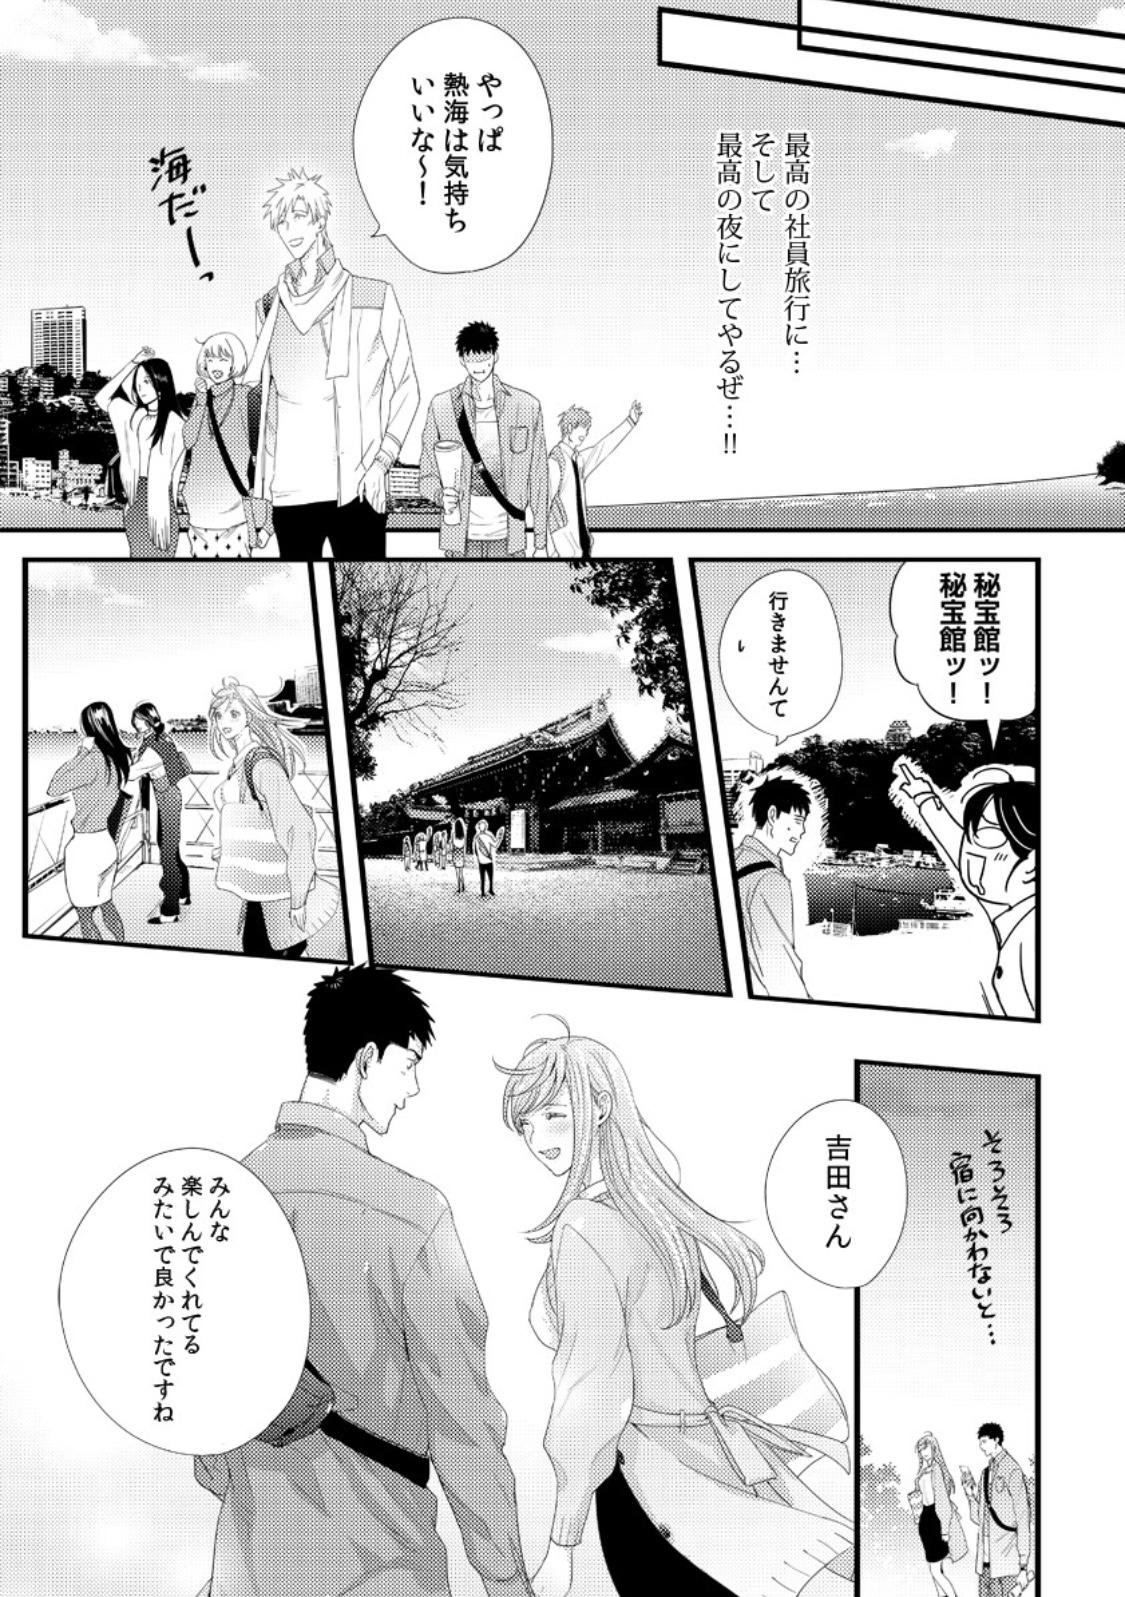 Please Let Me Hold You Futaba-San! Ch. 1-4 9